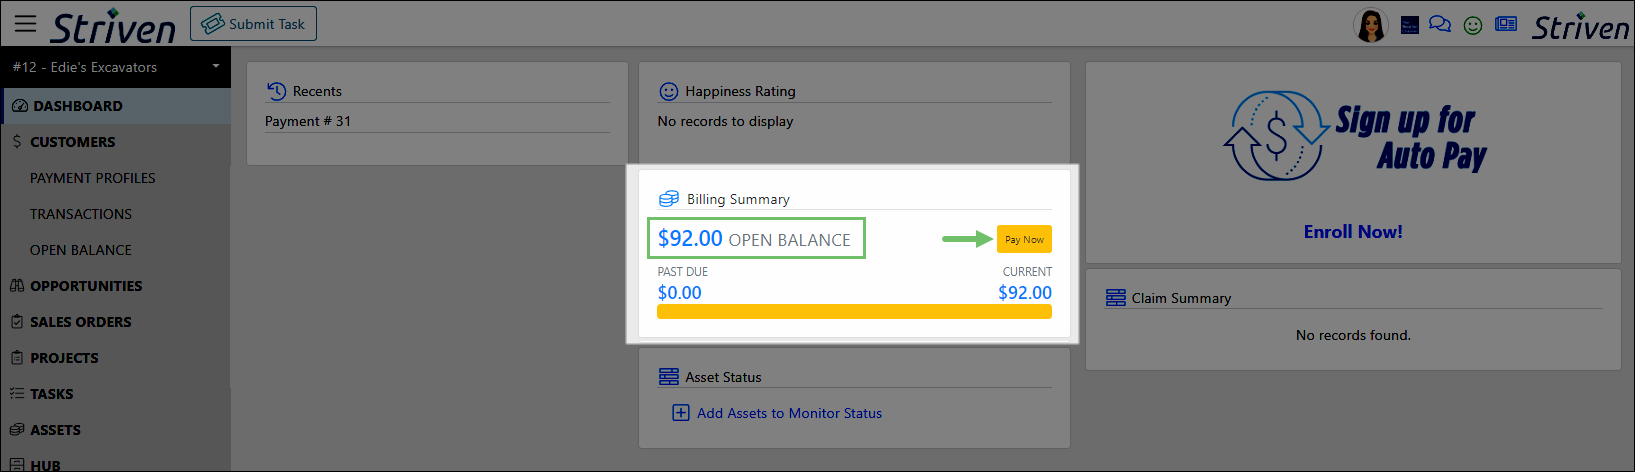 View of a Striven Customer Portal highlighting an open balance of $92.00 and a Pay Now button